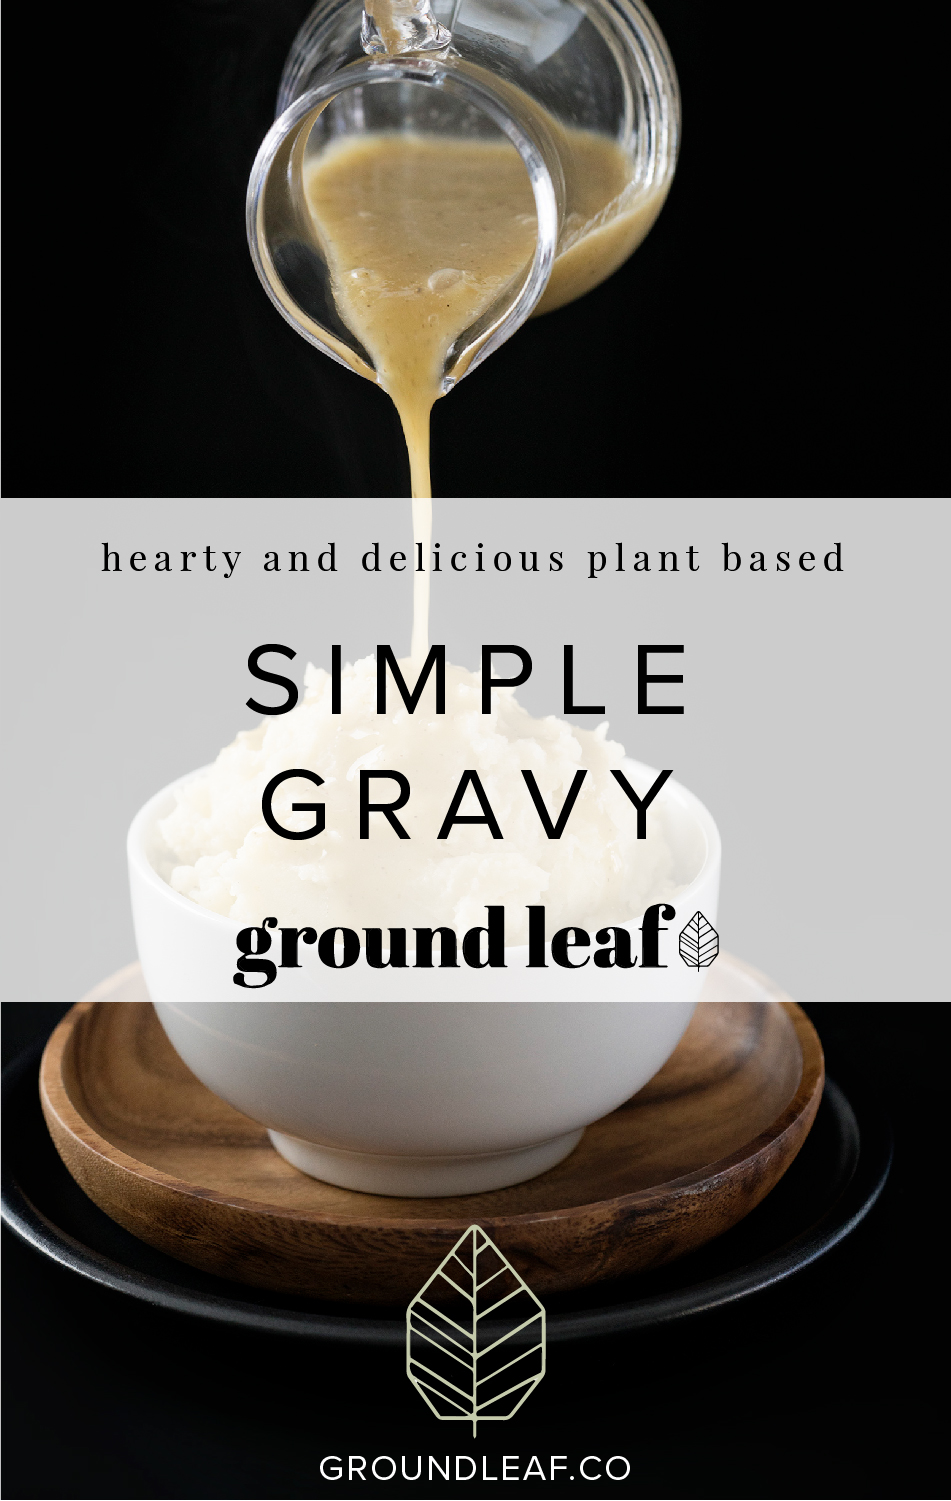 Simple, all plant-based gravy for a healthy and delicious meal!